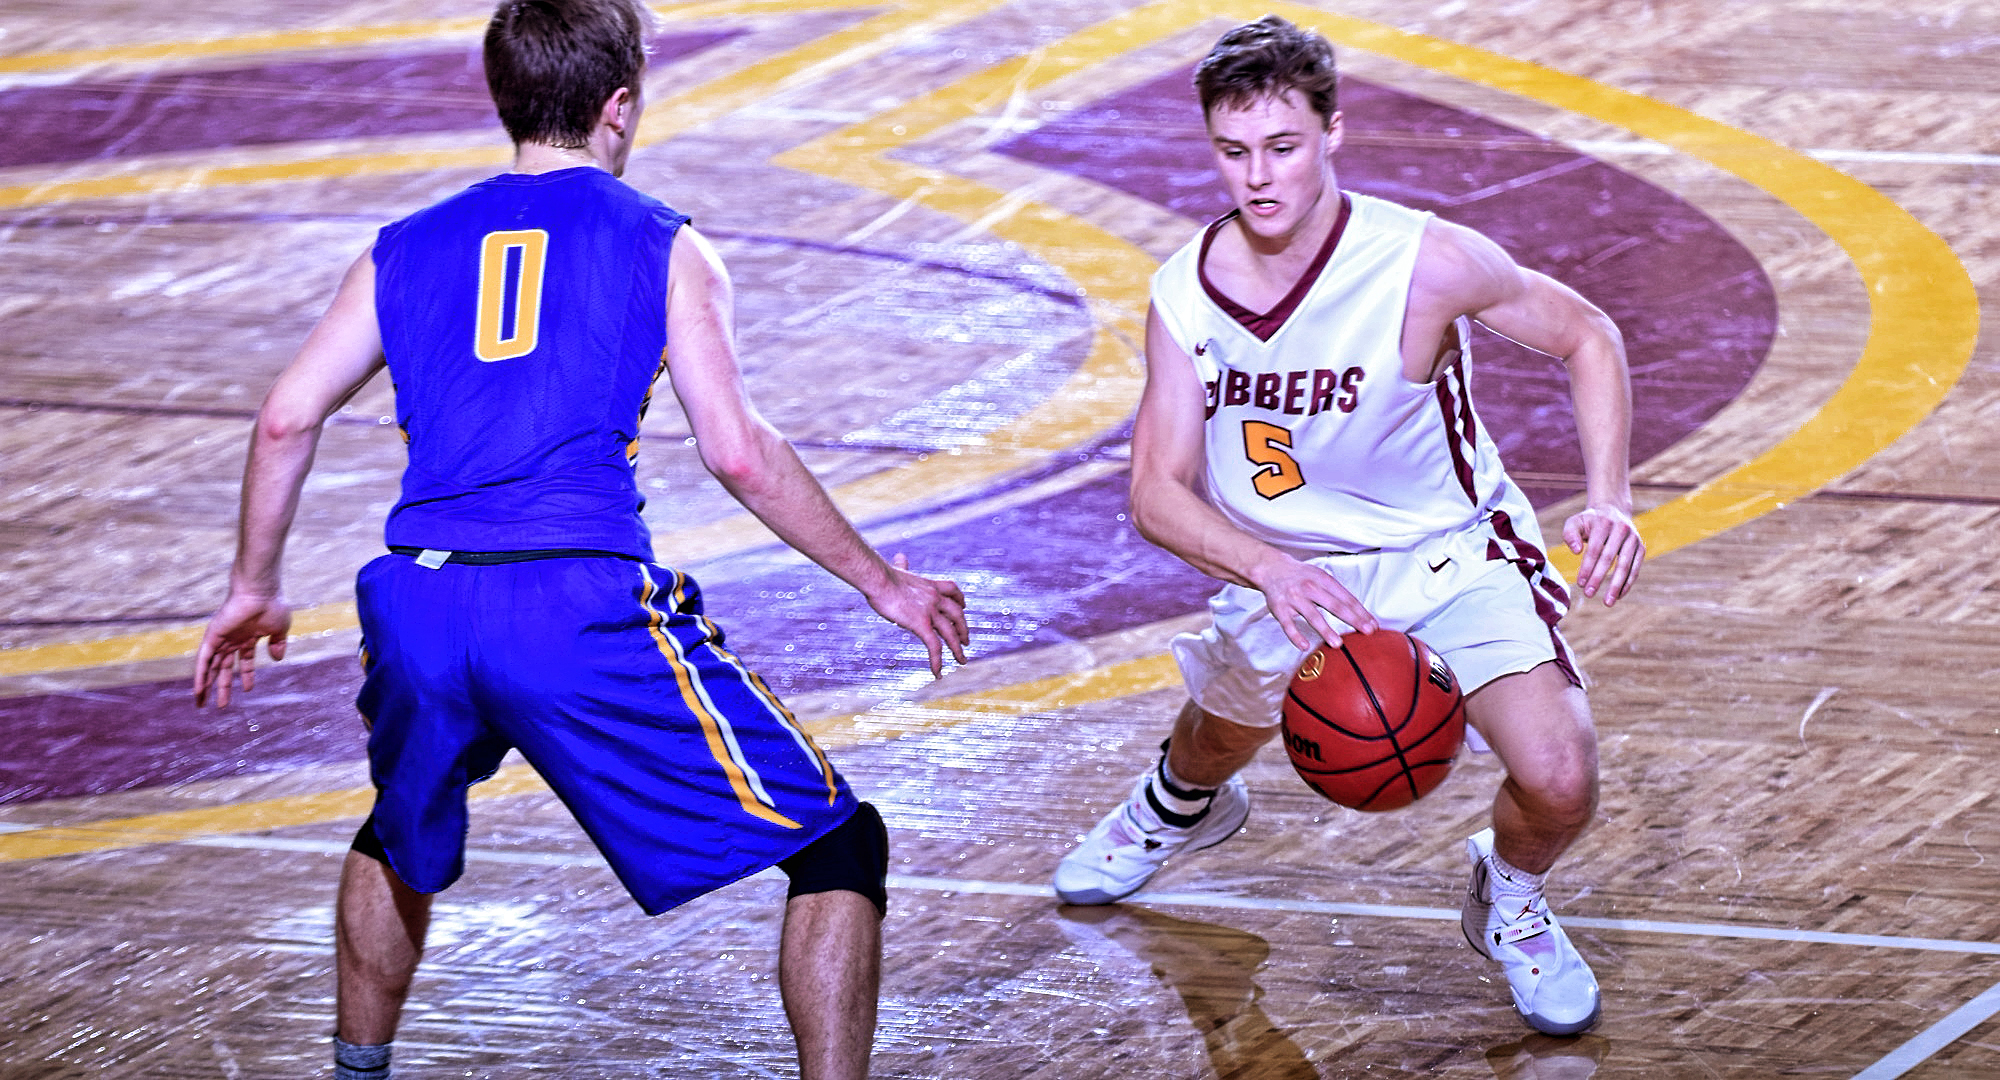 Freshman Jackson Jangula beats a defender off the dribble on his way to the basket and two of his career-high 26 points in the Cobbers' win over St. Scholastica.